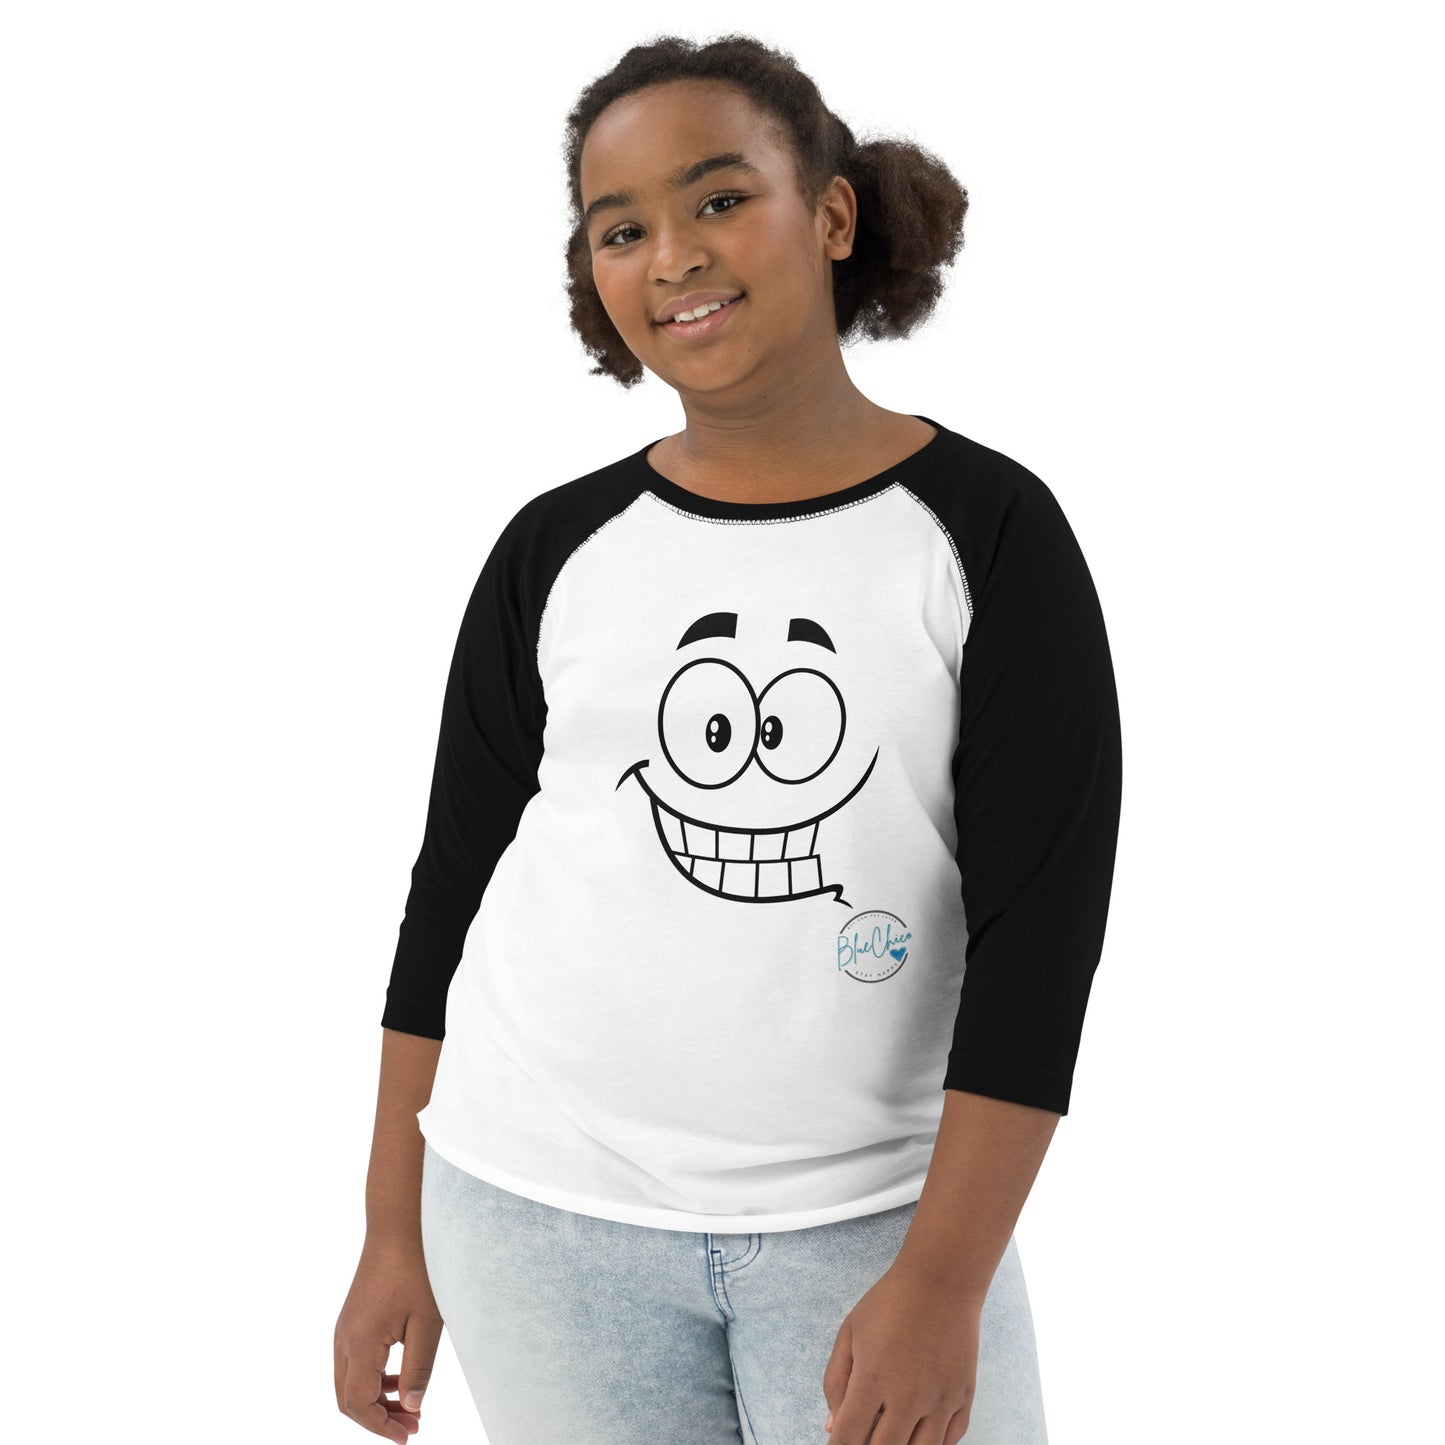 W'Sup Smile Youth Tee